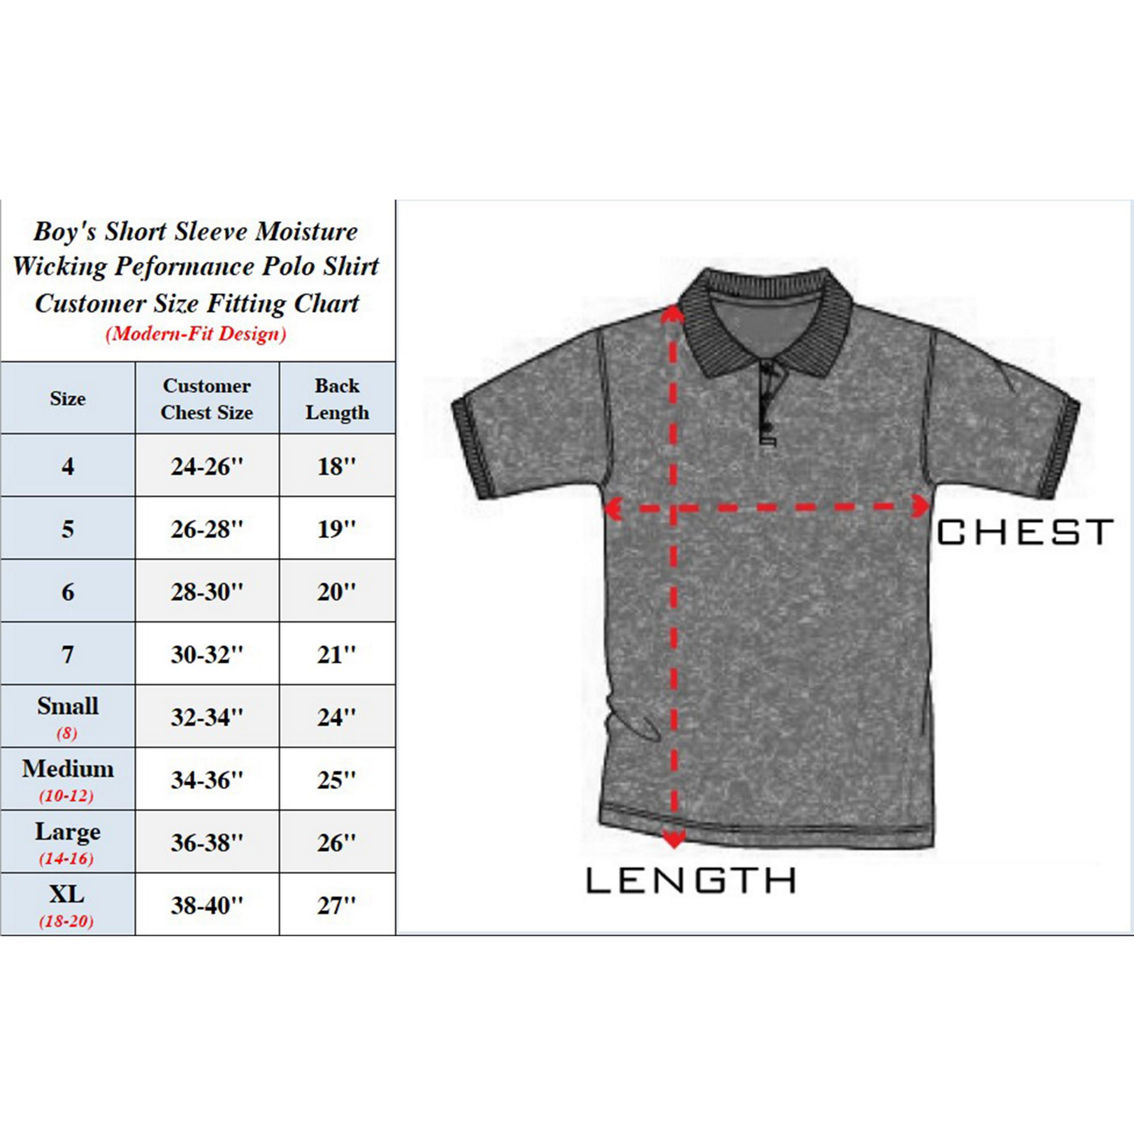 Galaxy By Harvic Children's Short Sleeve Moisture Wicking Polo Shirt - Image 2 of 2